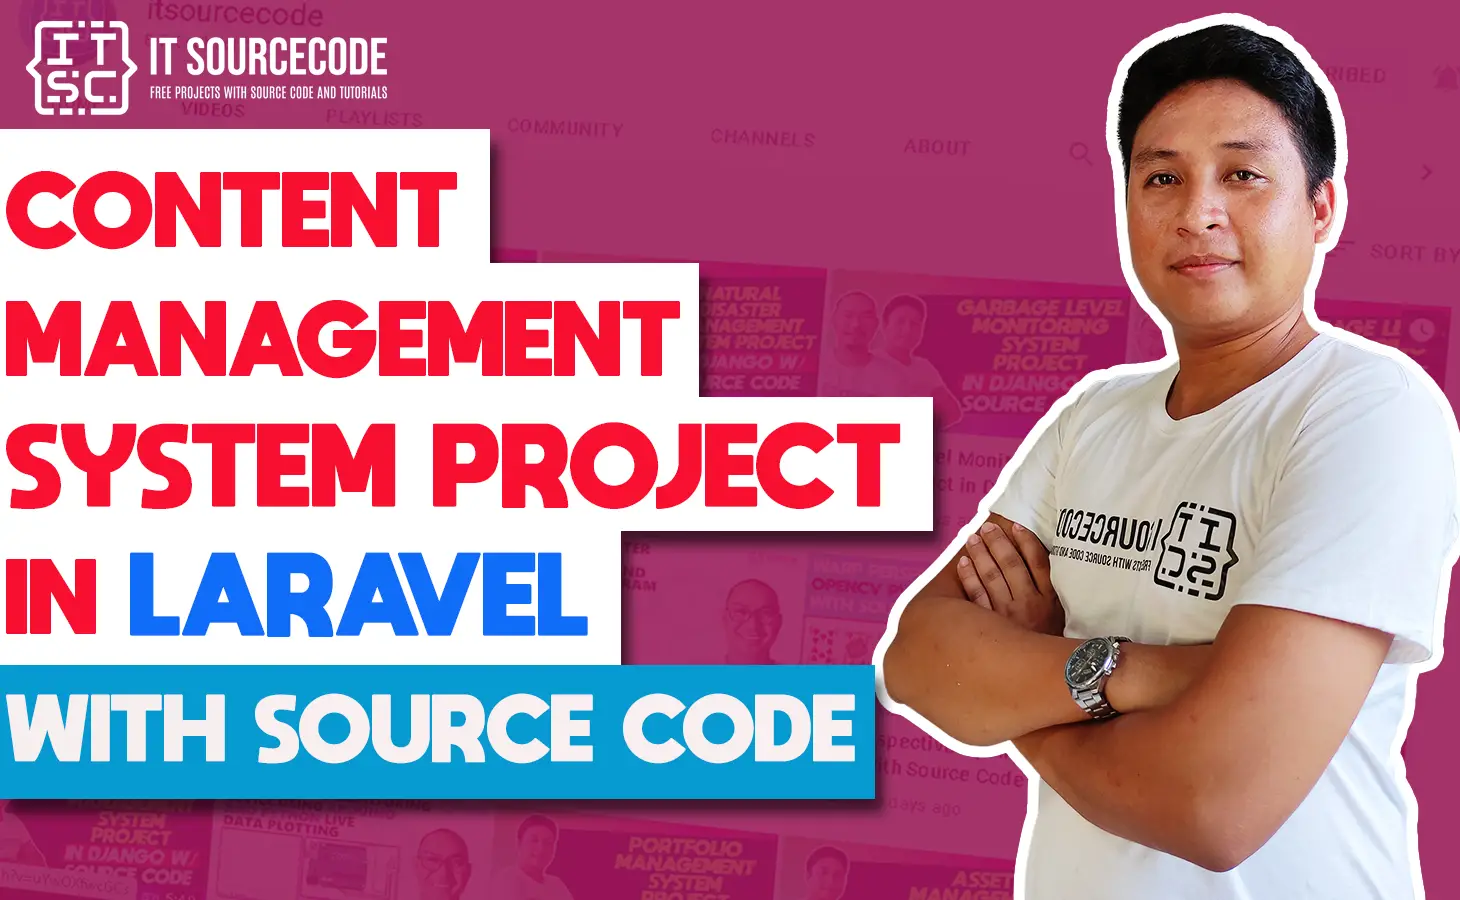 Content Management System Project in Laravel with Source Code